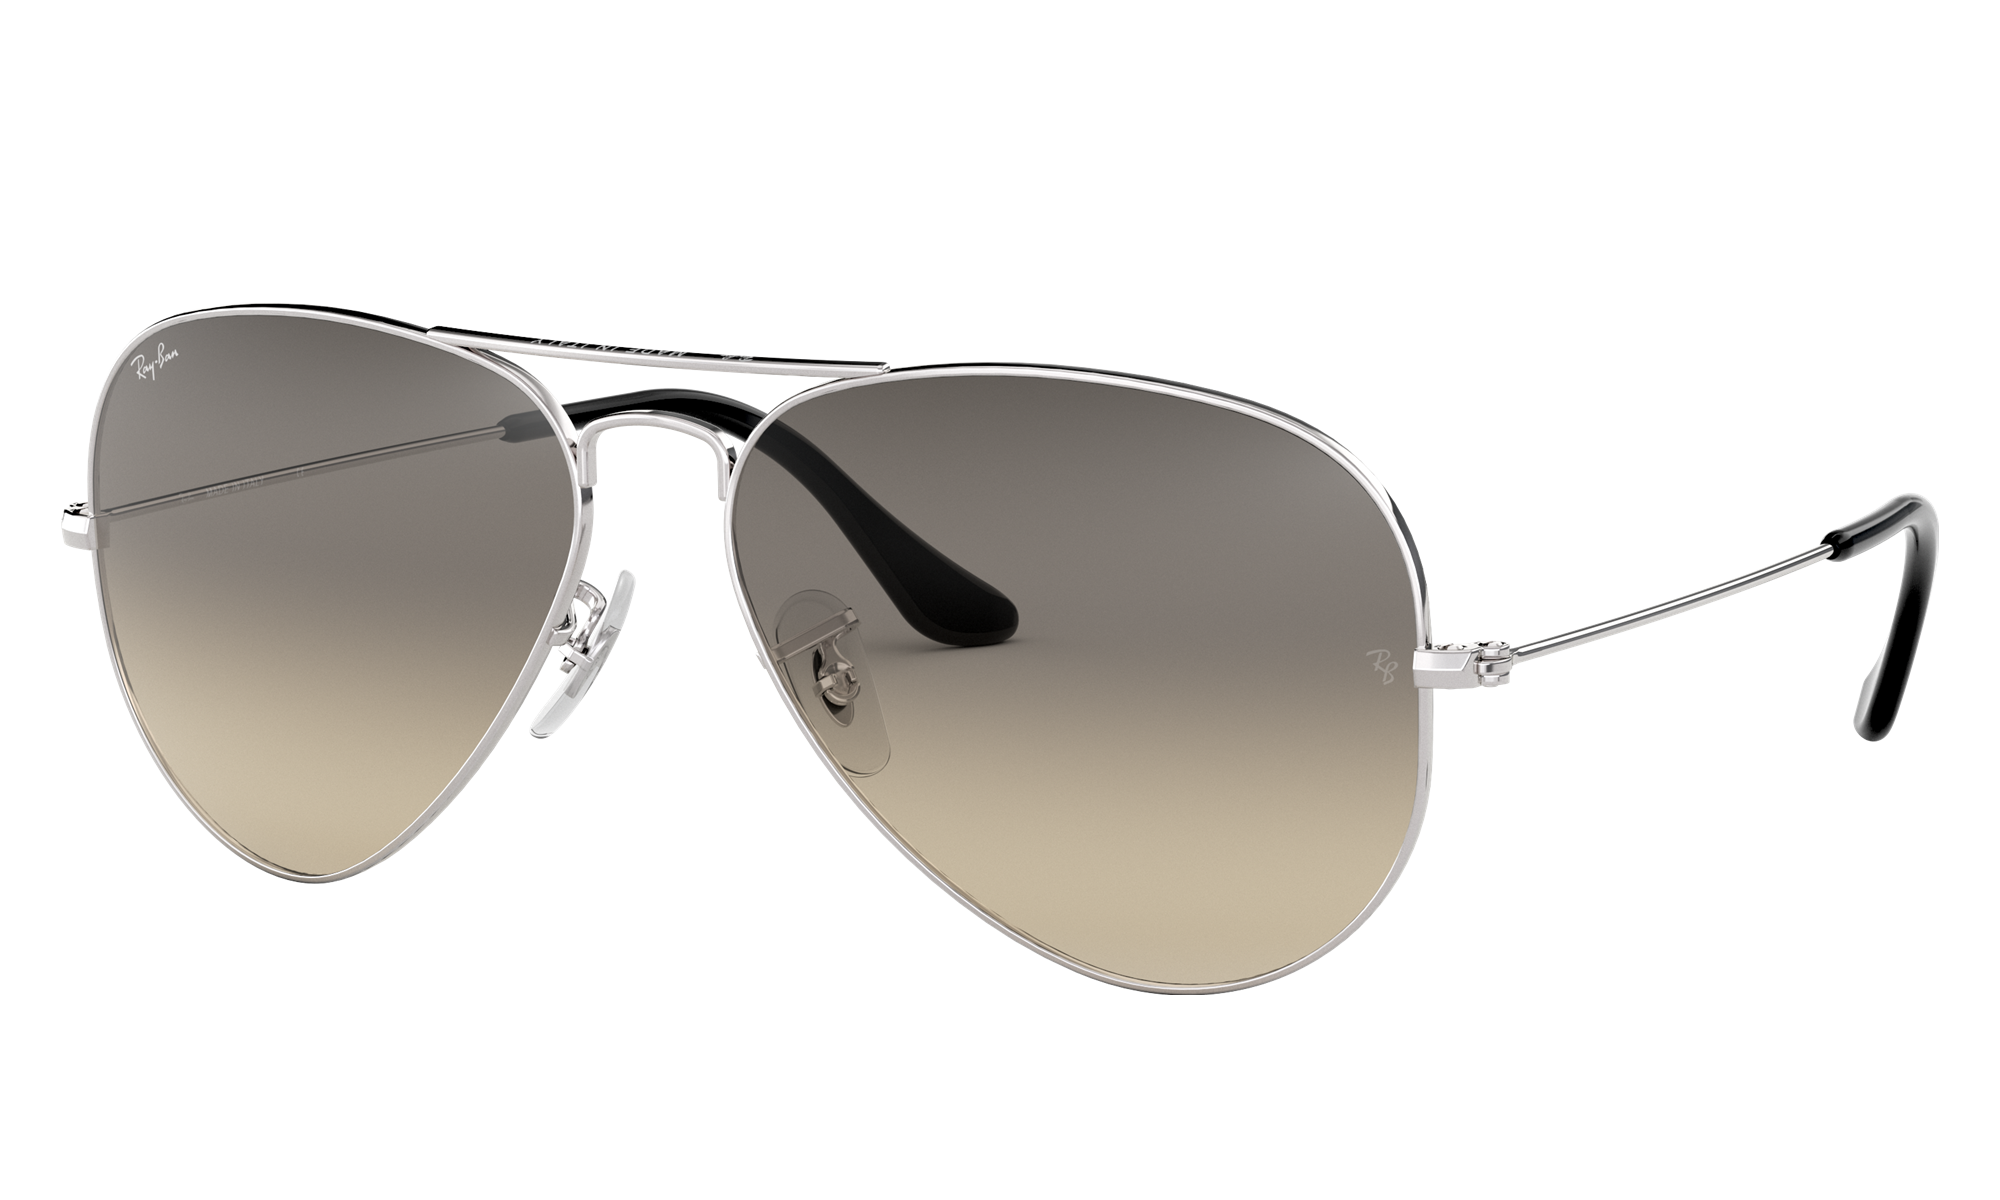 Ray-Ban Unisex Rb3025 Silver Size: Large